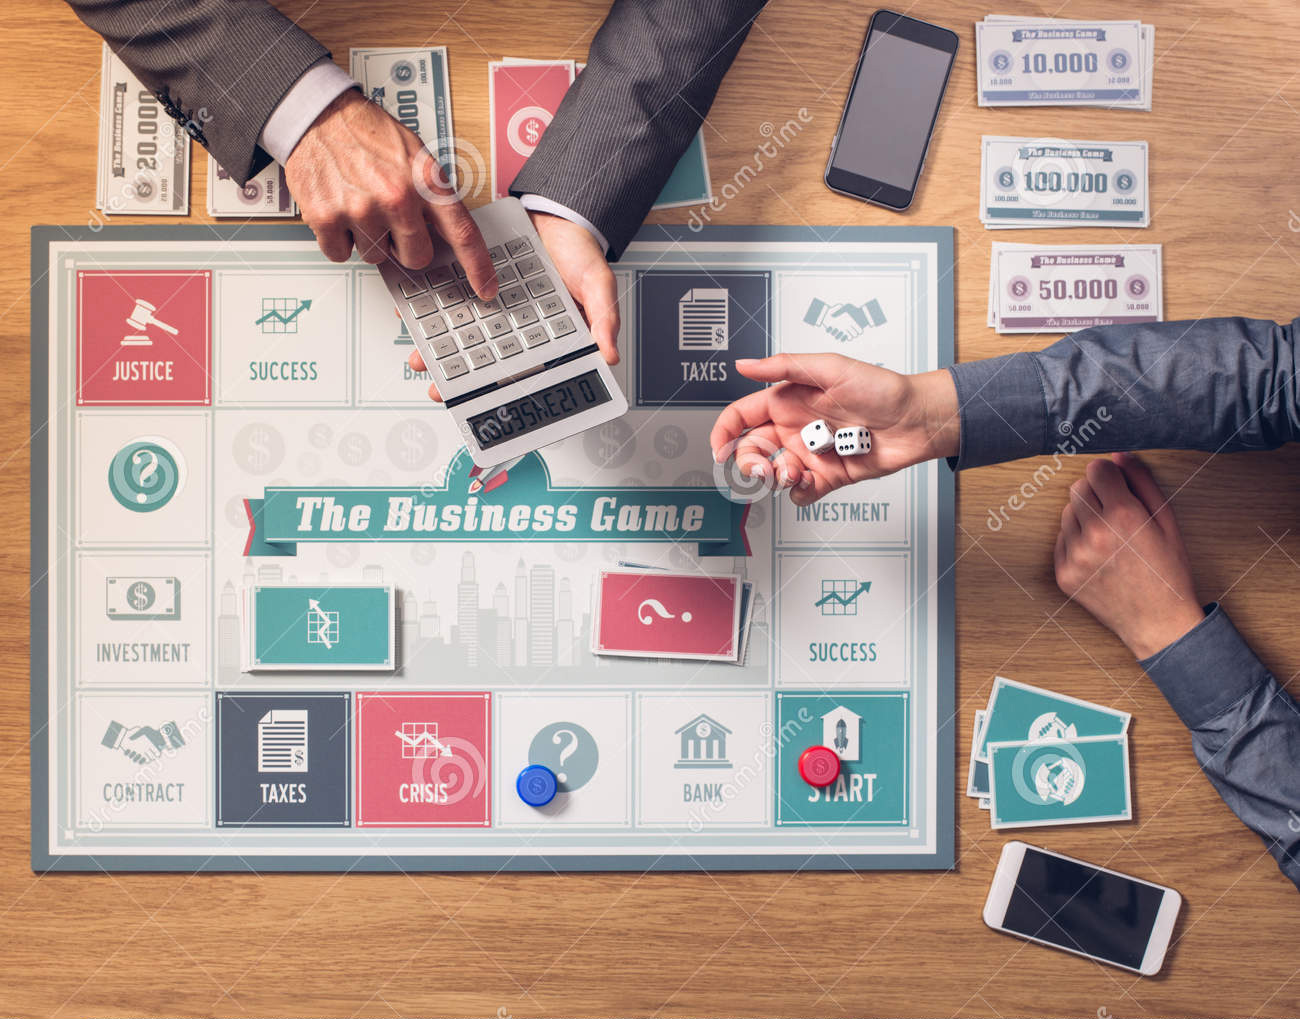 Games as business